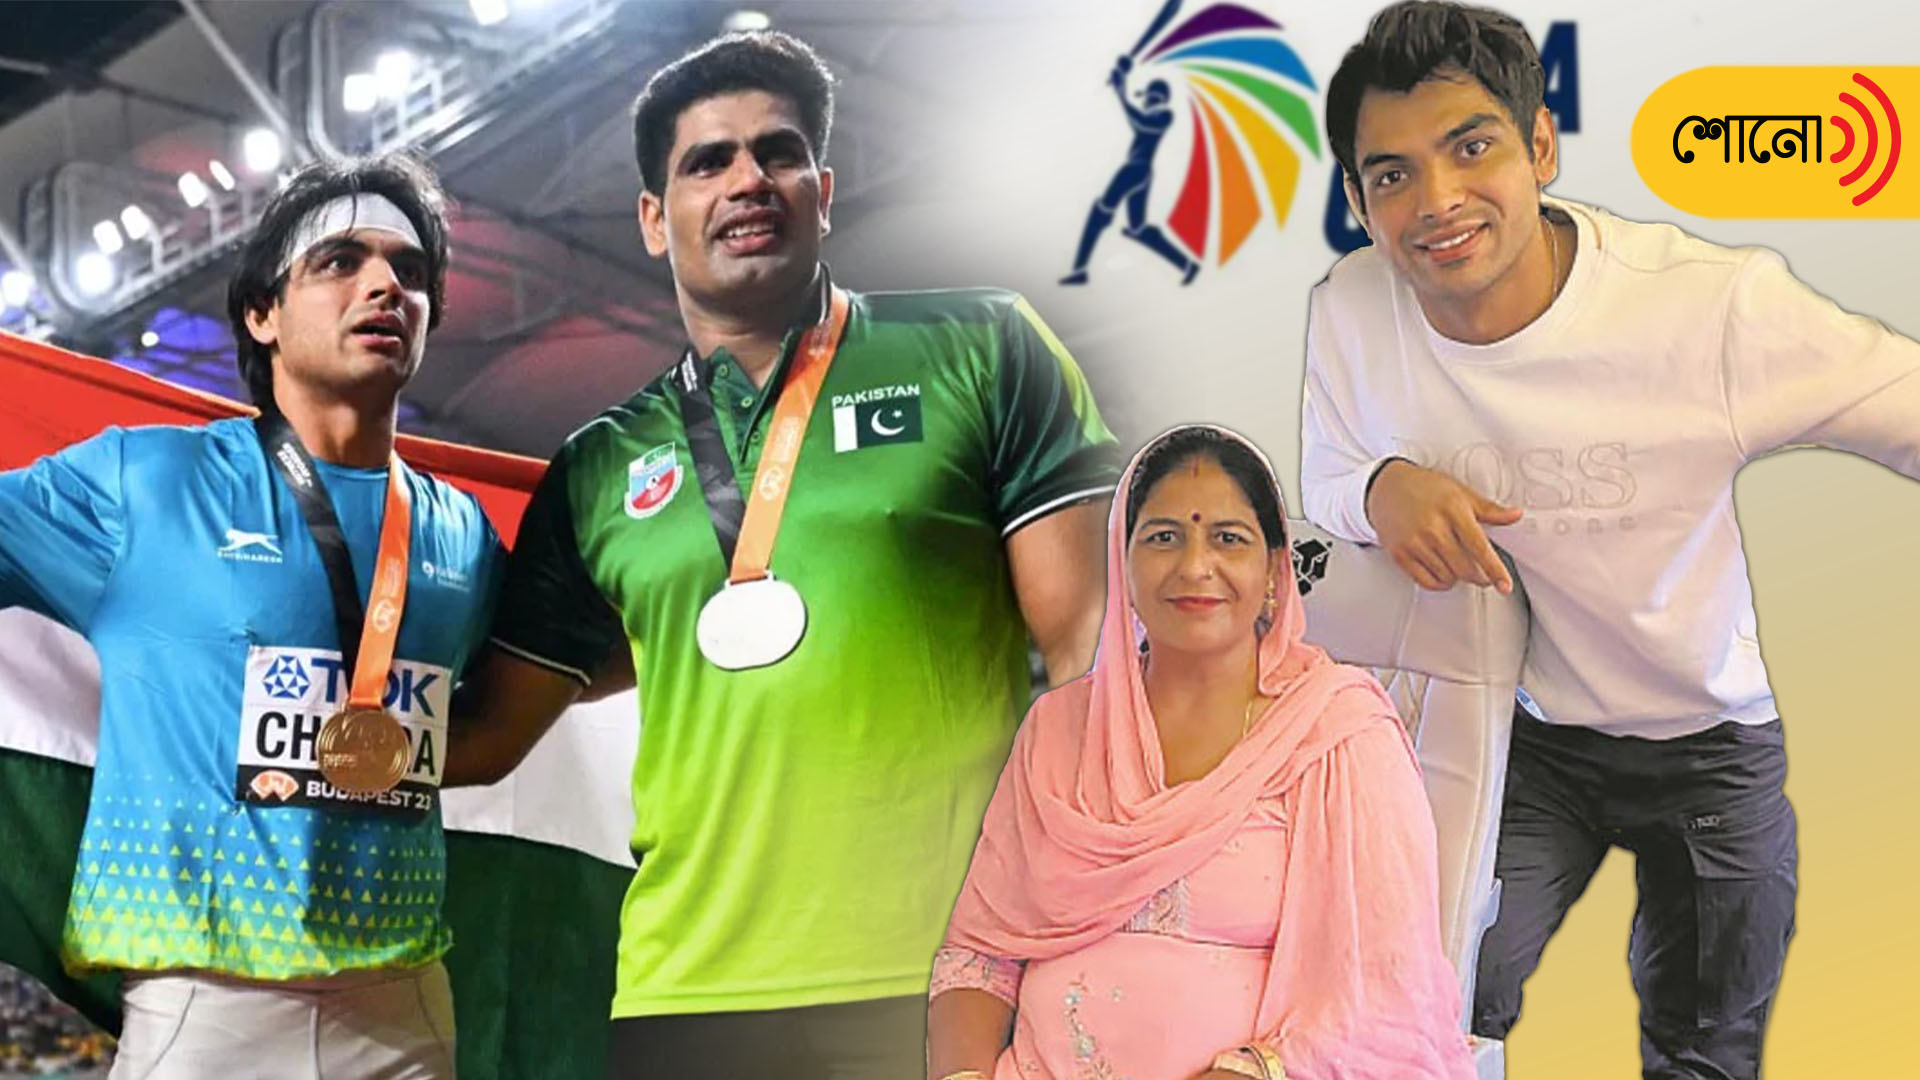 Neeraj Chopra’s mom wins the internet for comments about her son's victory over Pakistani player